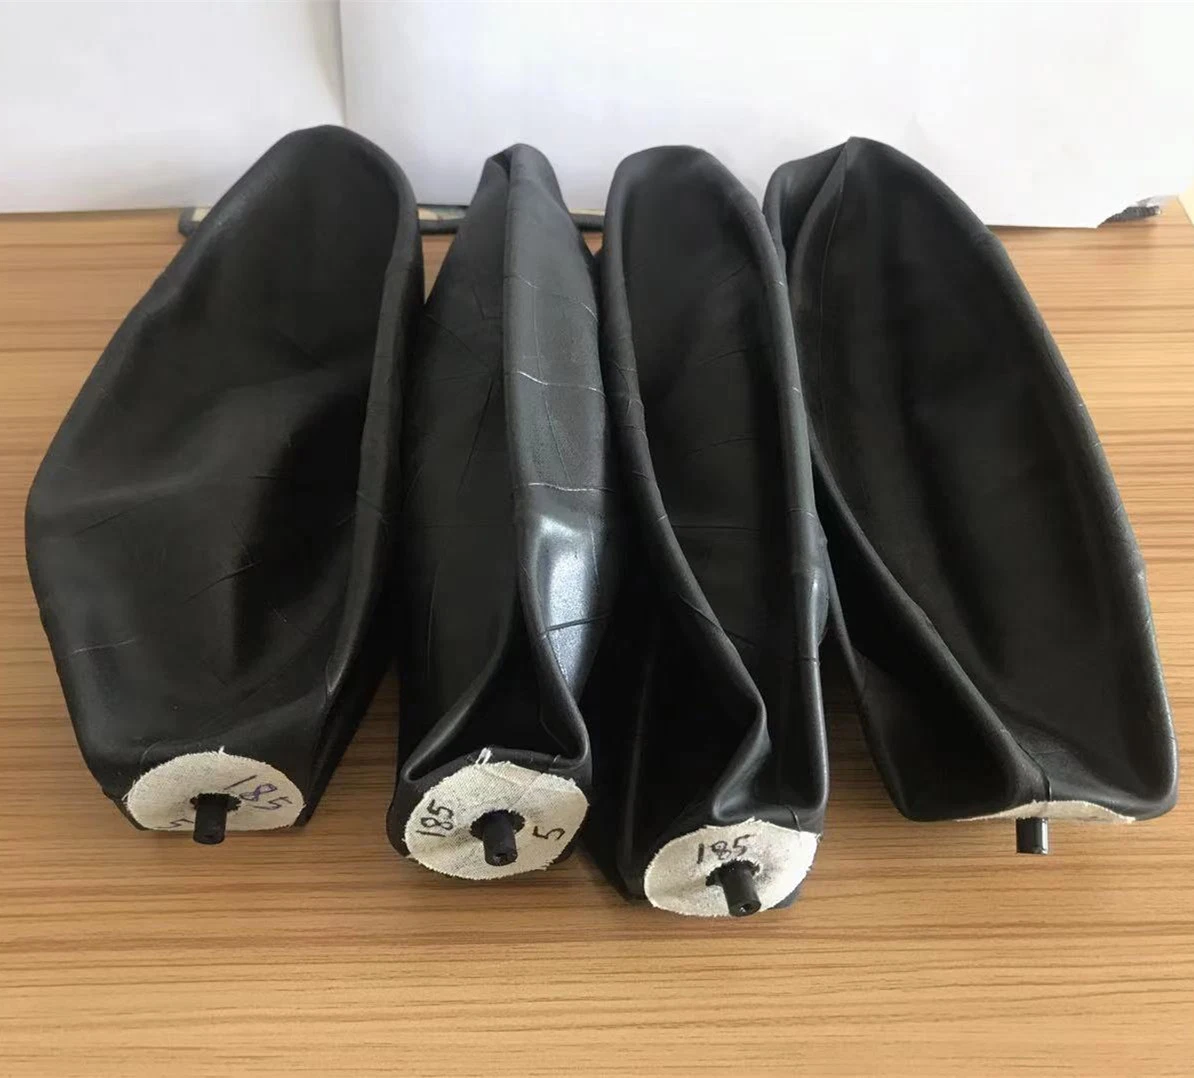 China Factory Supply High Quality Lower Price Rubber Bladder for Football Basket Ball and Volleyball